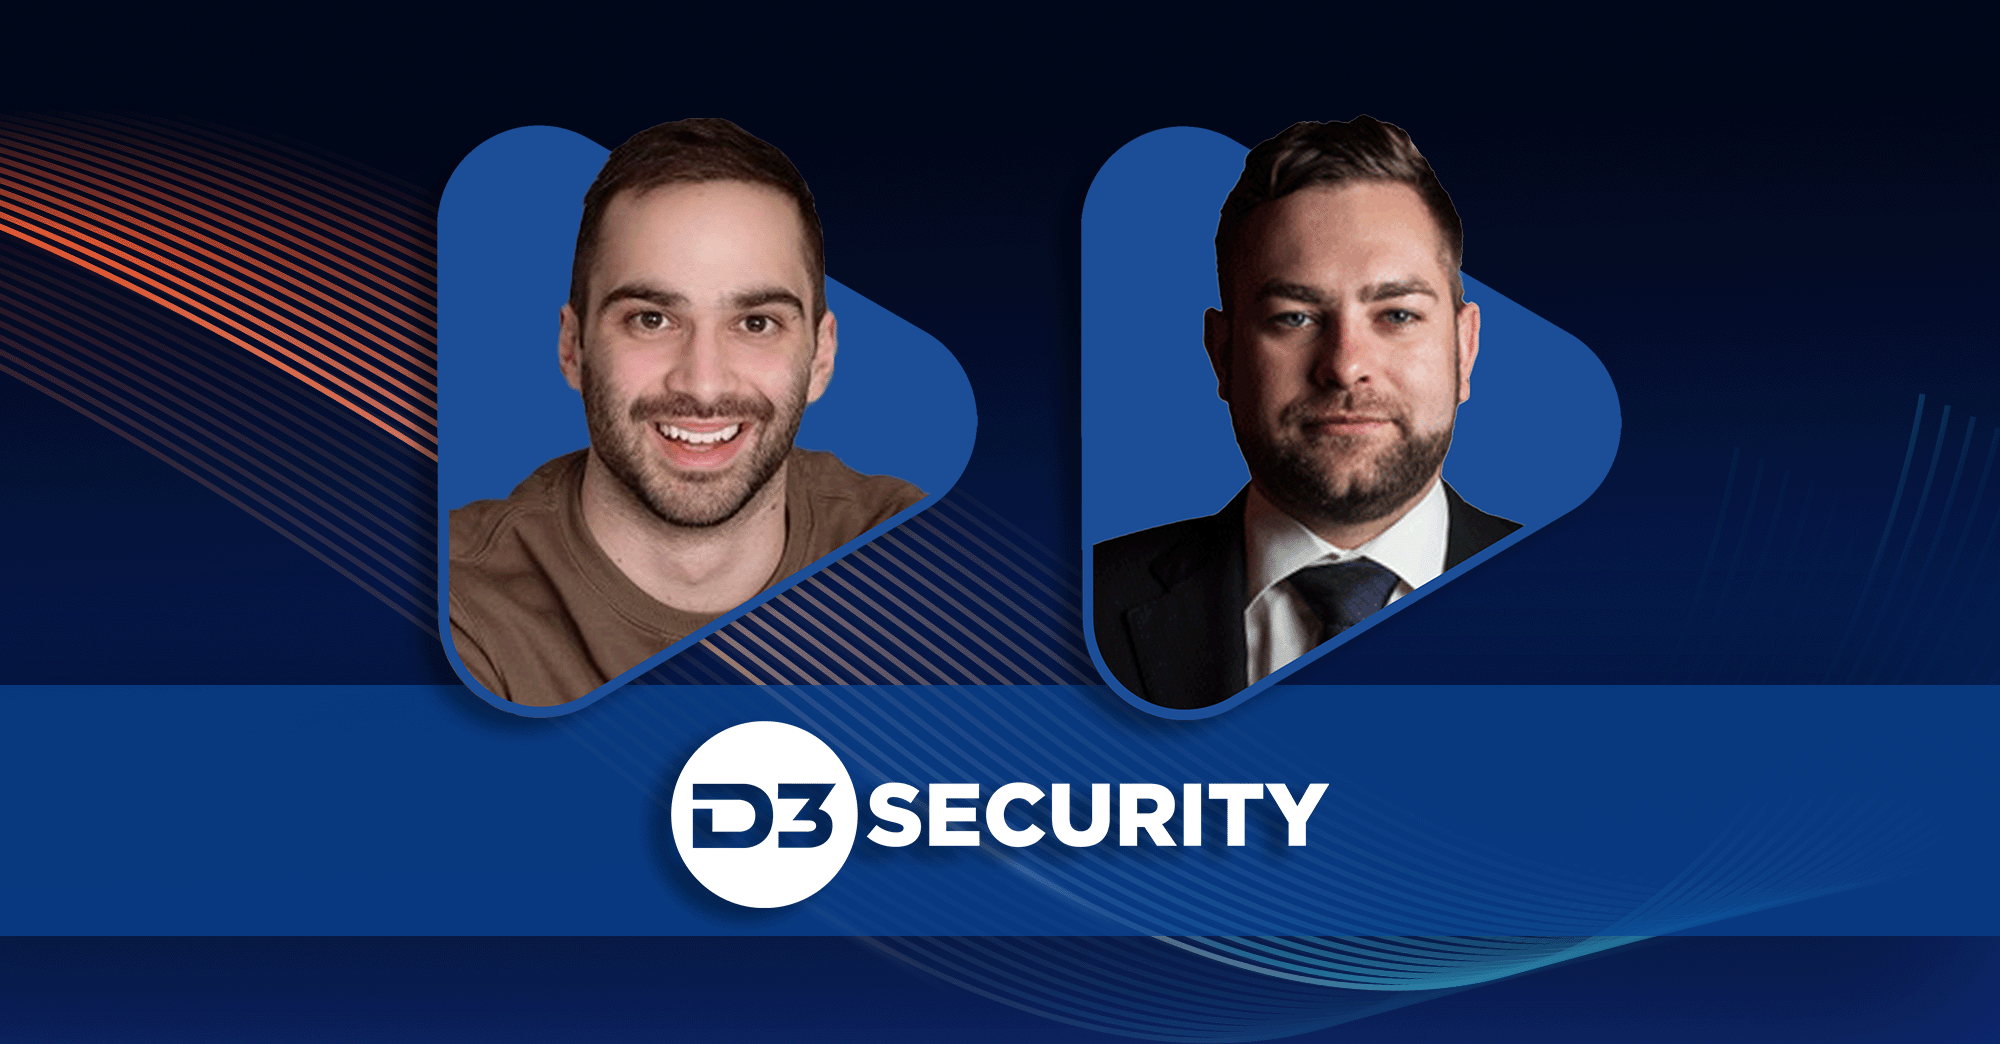 D3 Security Alex and Pierre